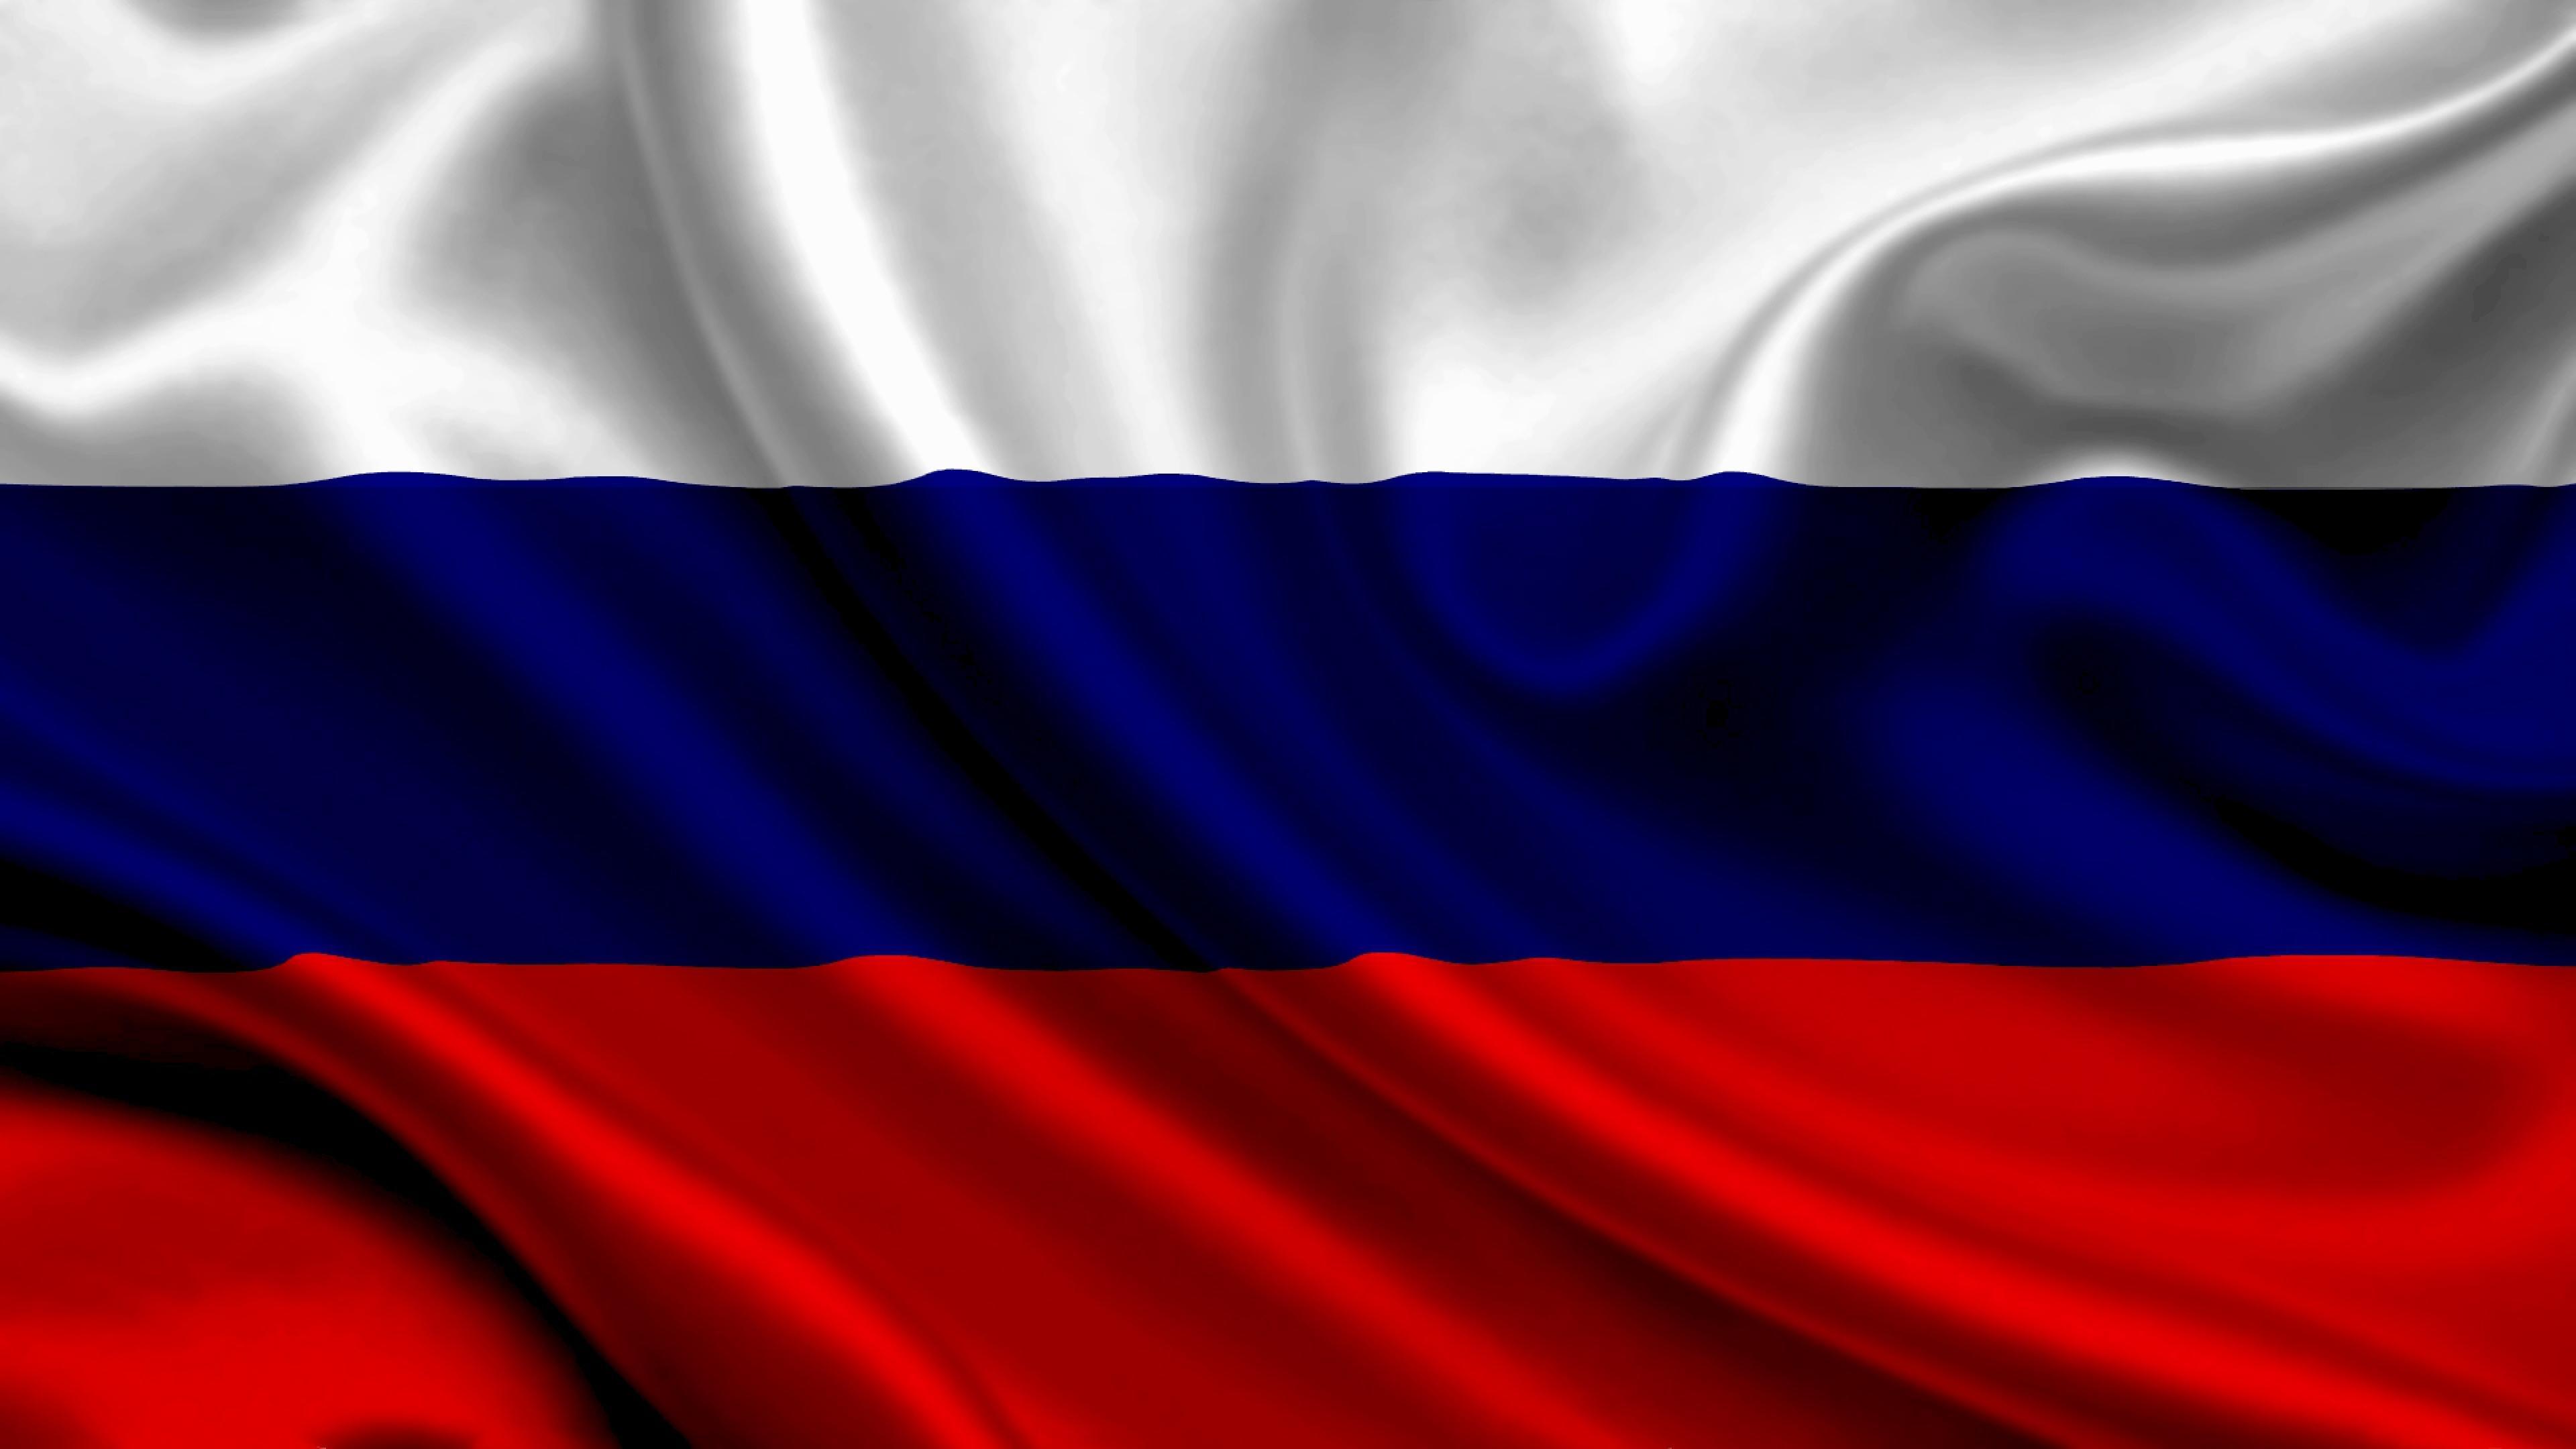 Russia Flag Live Wallpaper for Android - APK Download